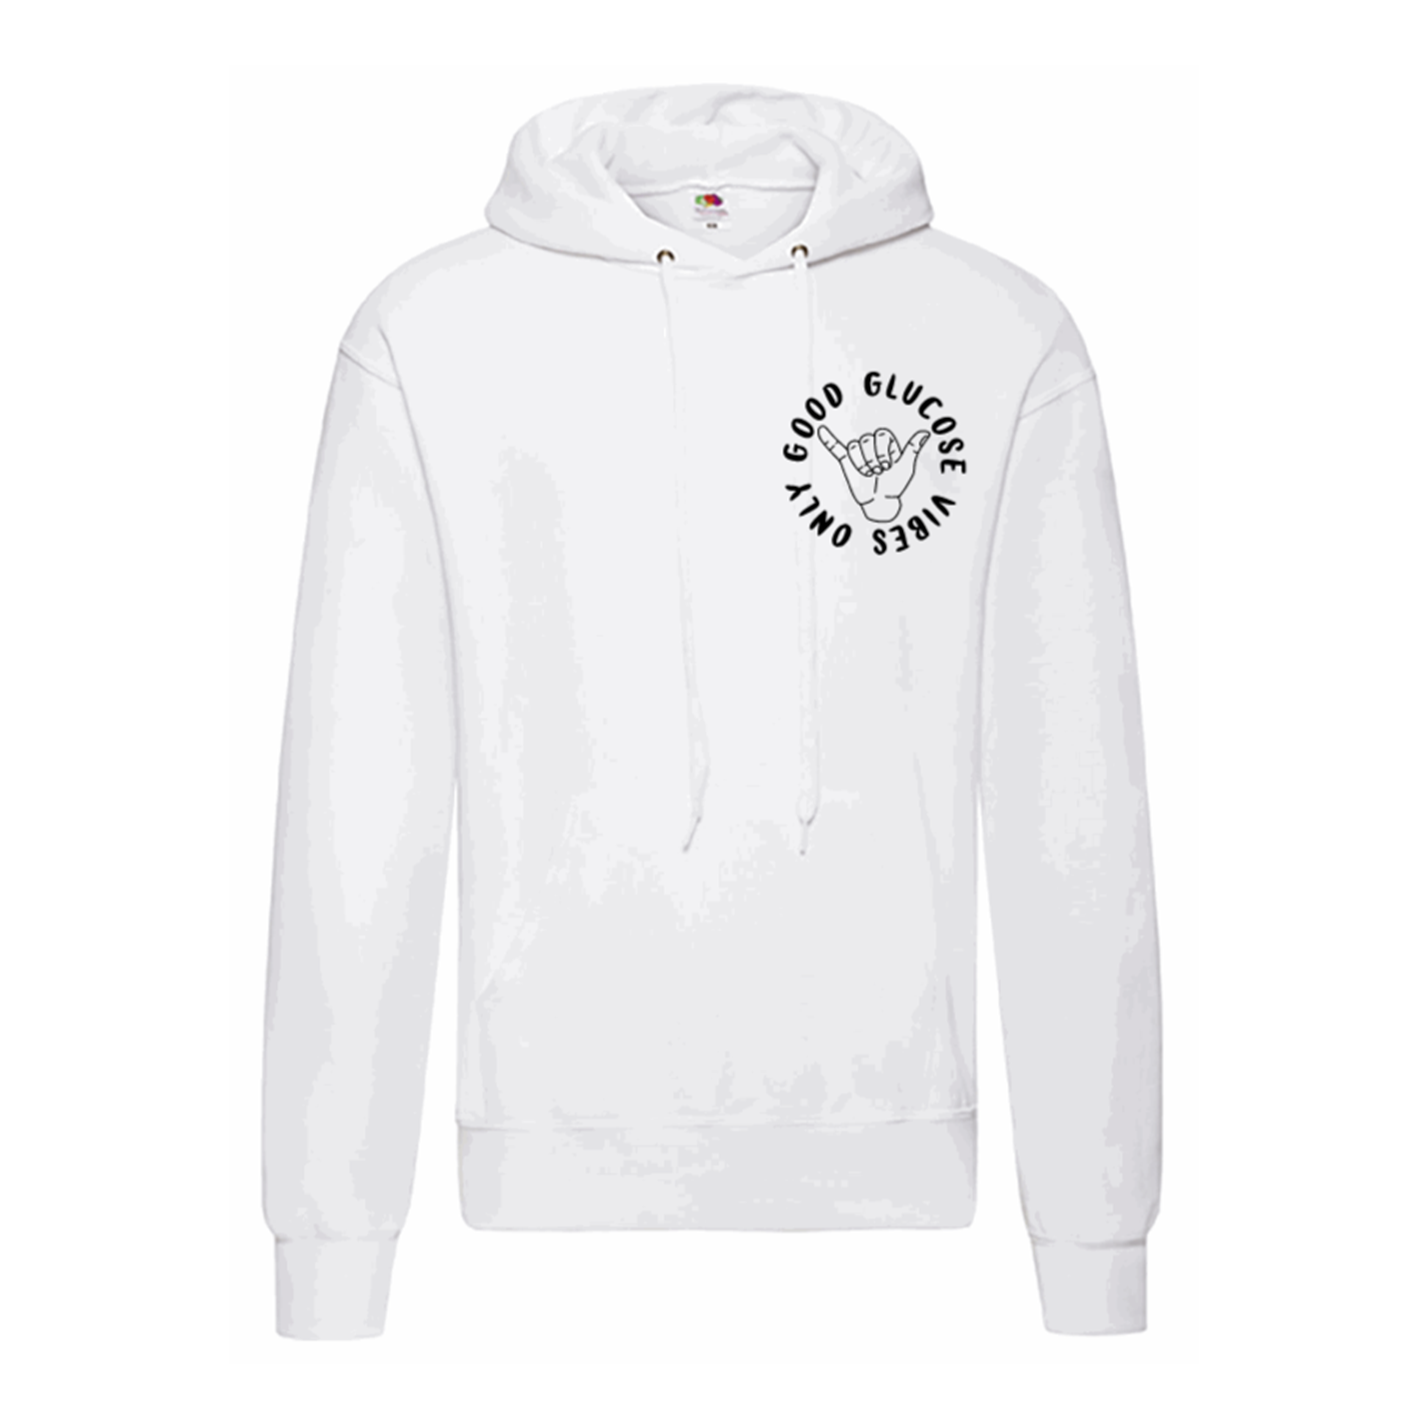 Good Glucose Vibes Only Hoodie